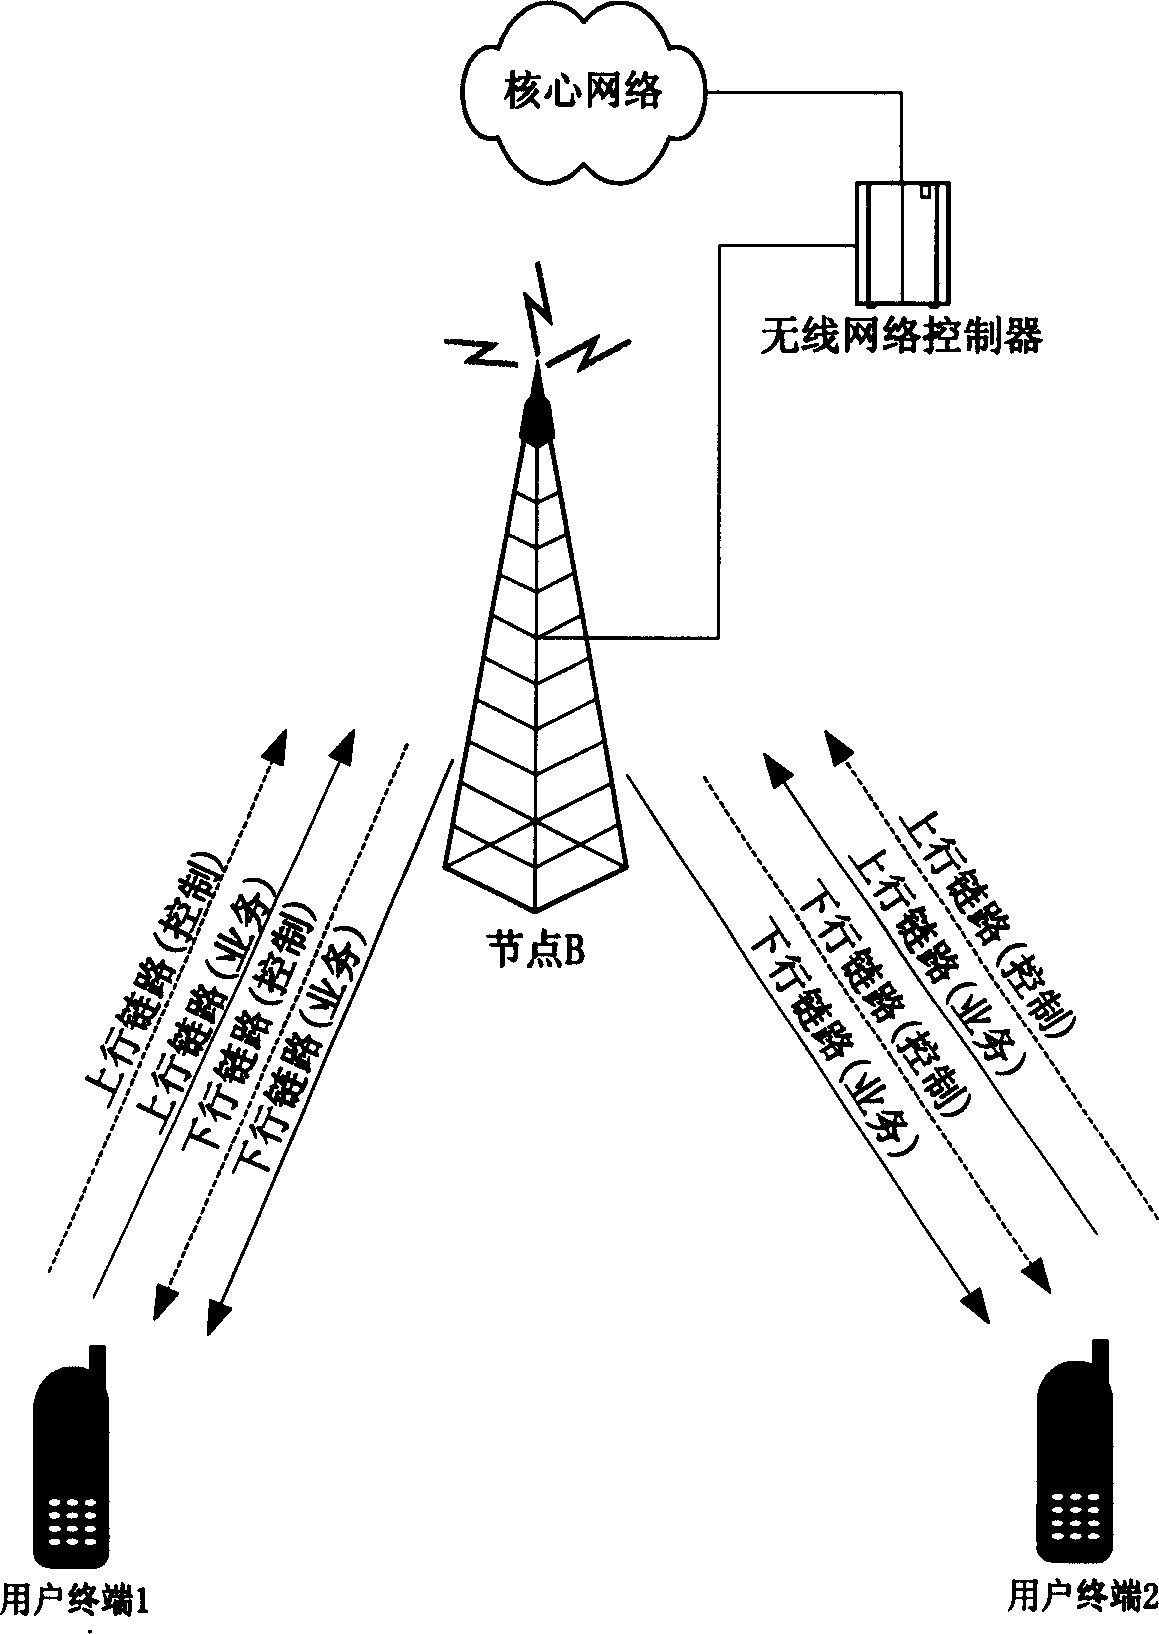 Method and apparatus for soft switching between P2P communication mode and traditional communication mode in radio communication system